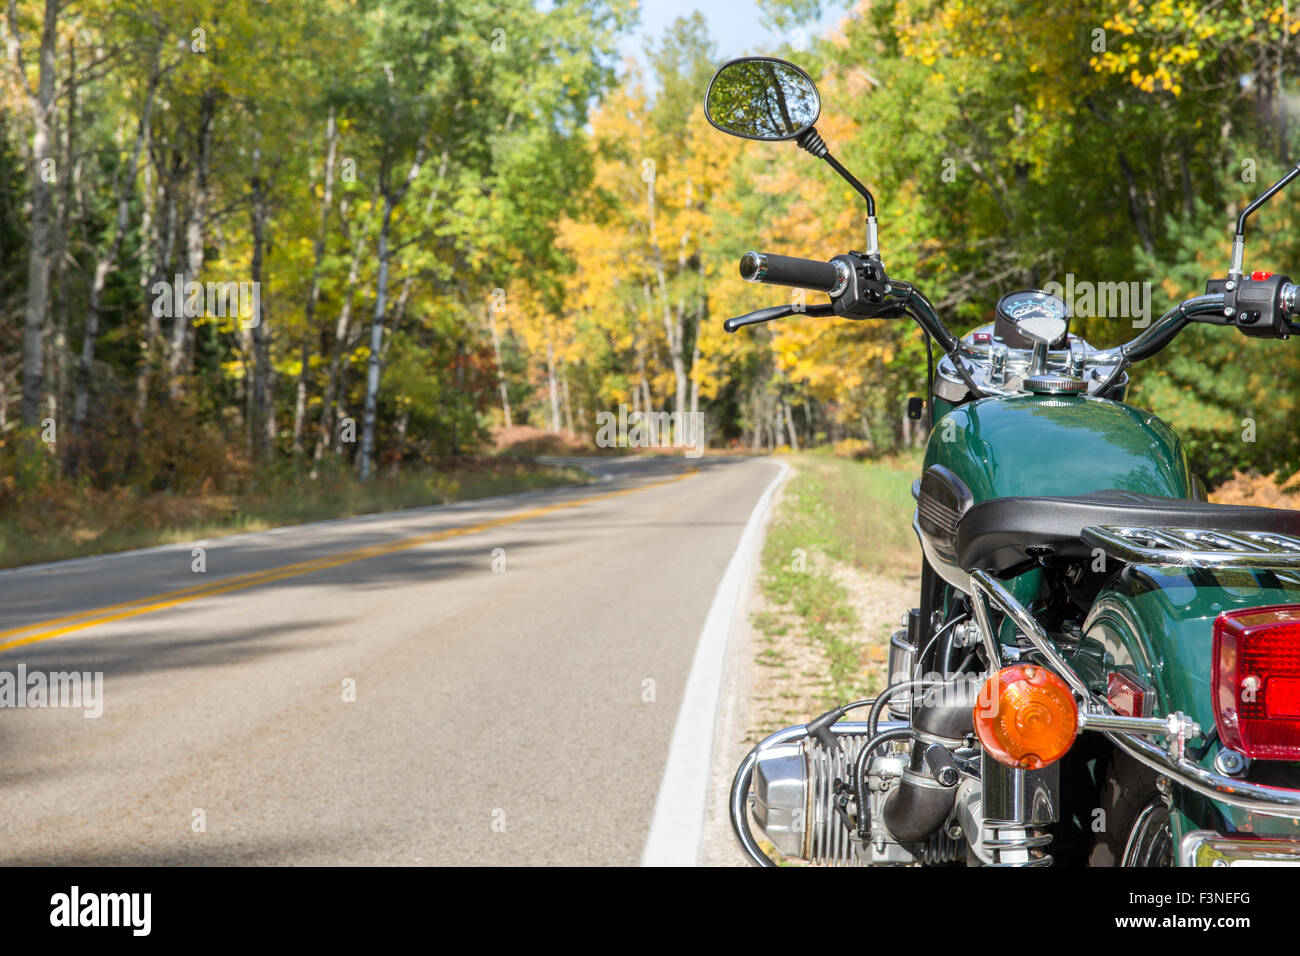 A green motorcycle alongside a curving open road in the Fall.  Selective focus on motorcycle with copy space in left frame. Stock Photo